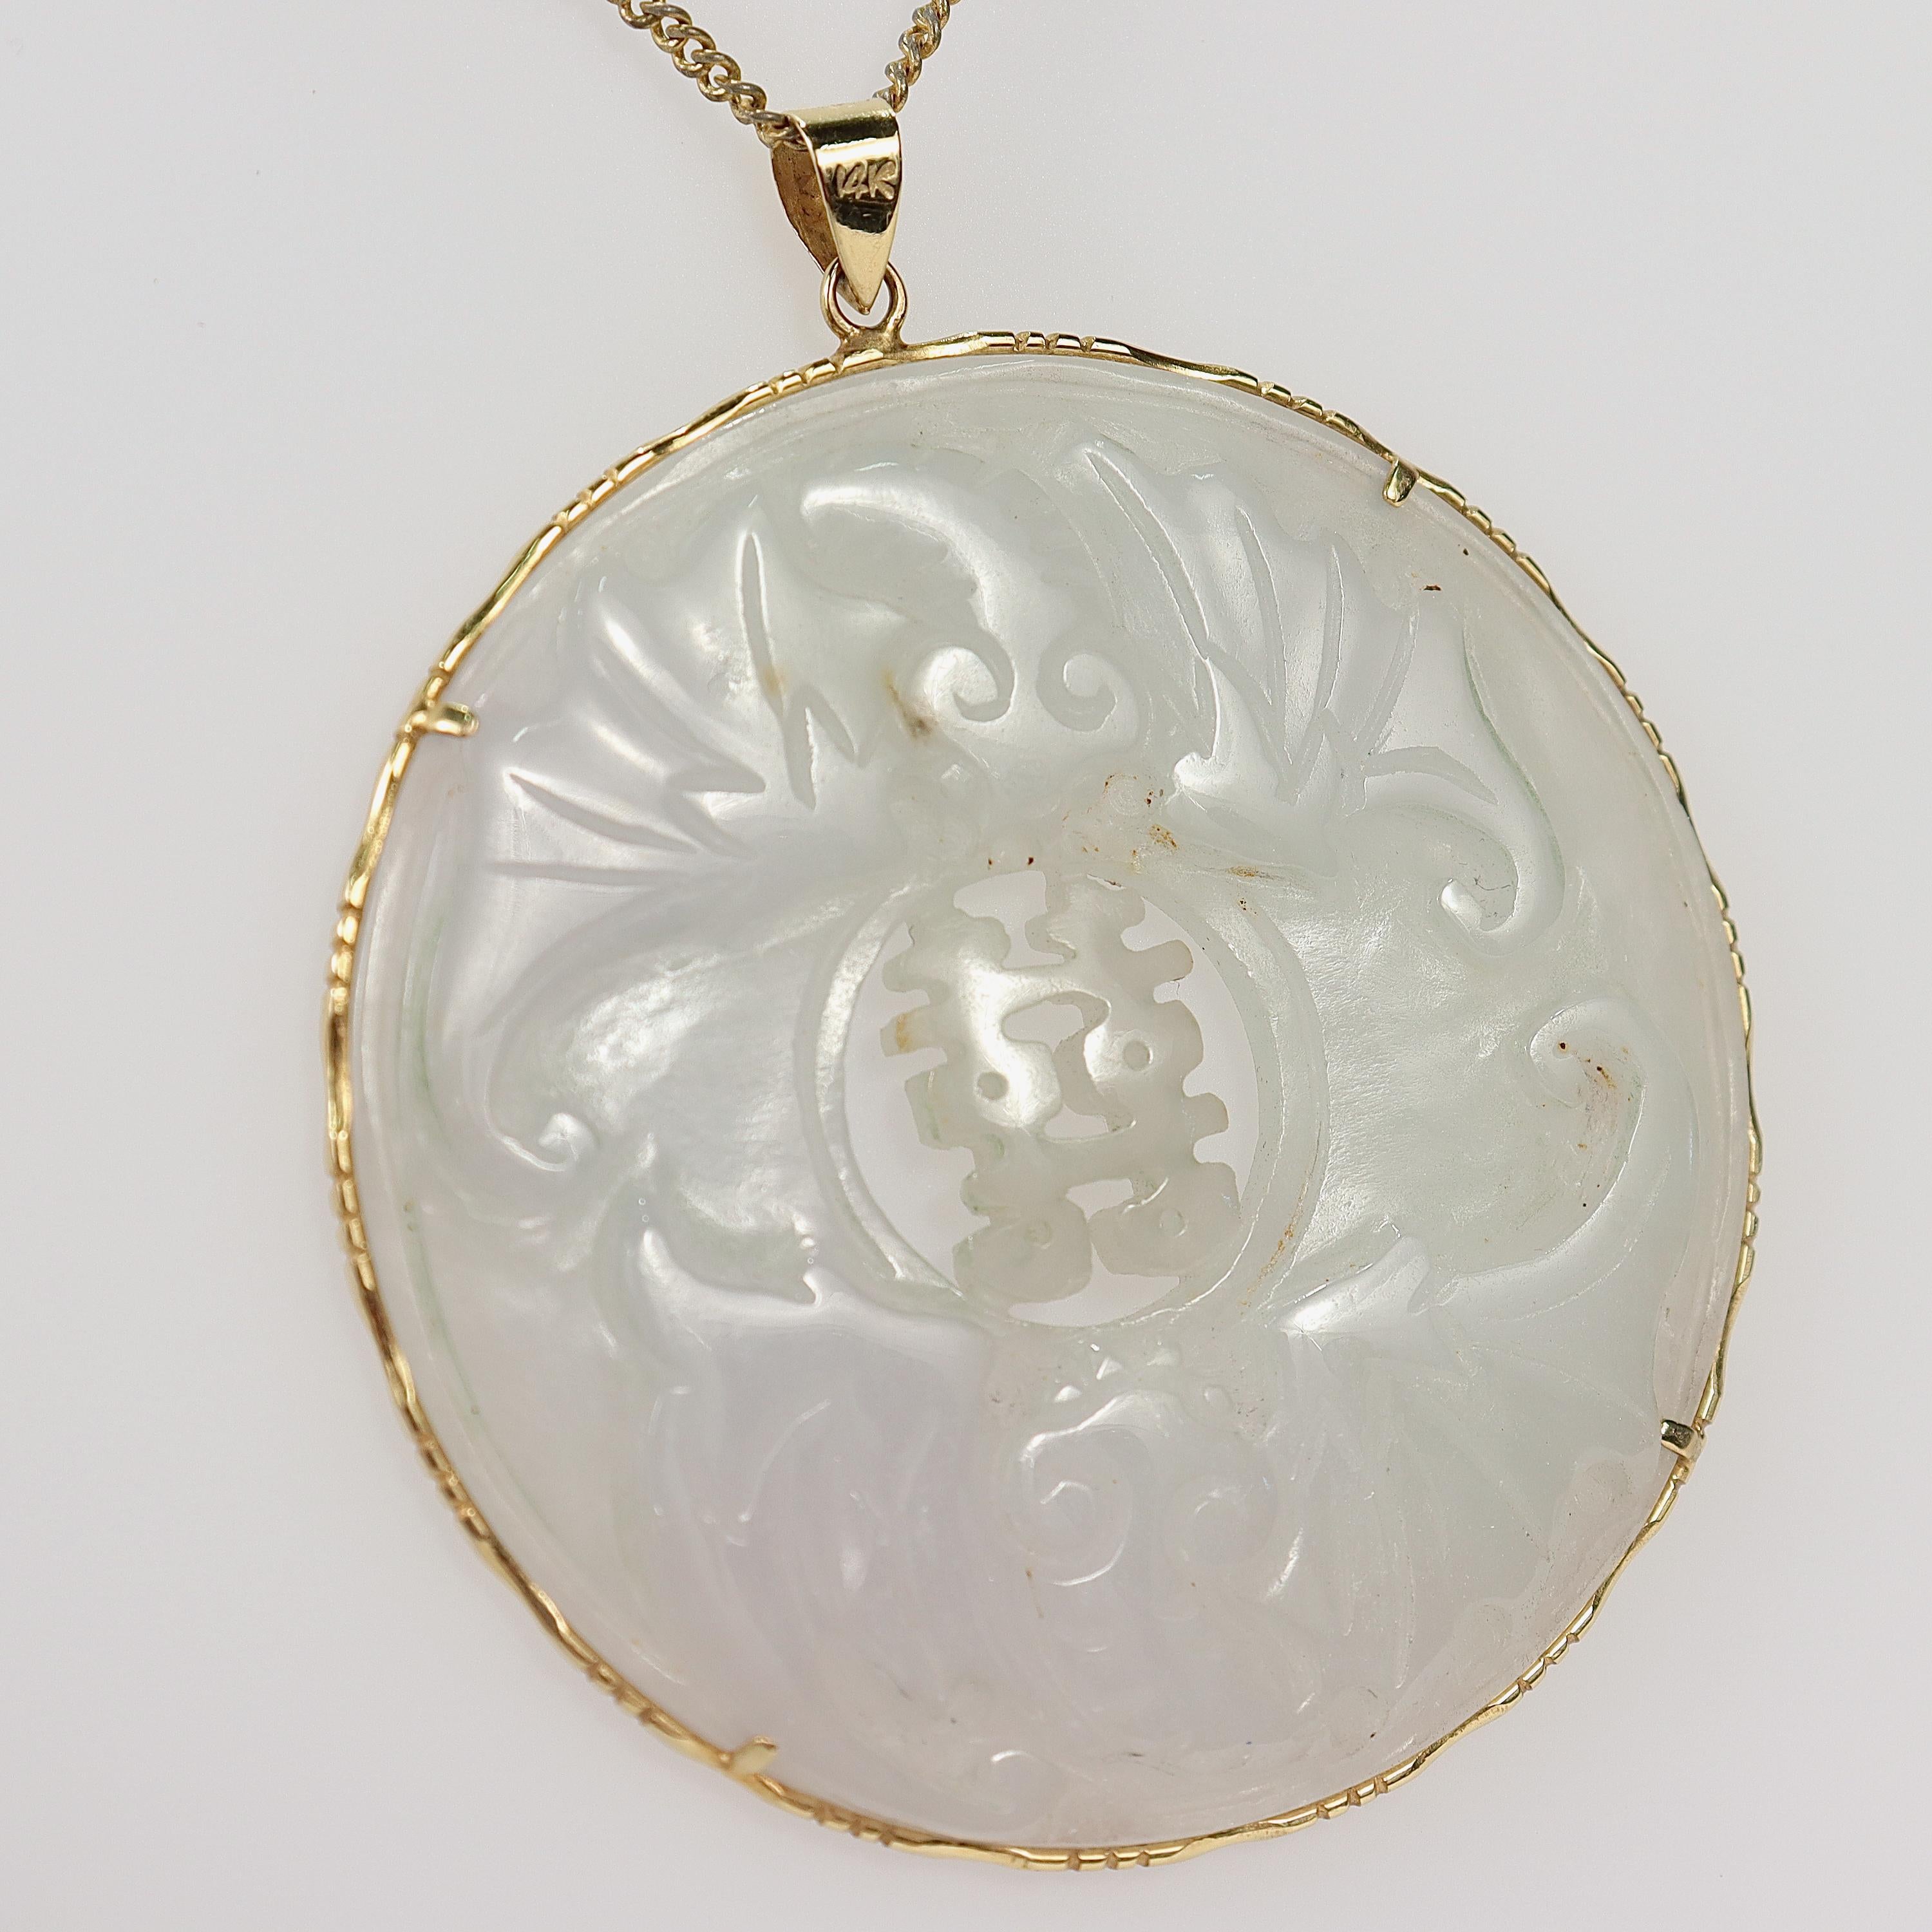 A fine Chinese gold & jade pendant.

With a large carved jade amulet prong set in a 14k gold frame. 

From a defunct 1970s jewelry shop. This pendant is from a group of old, unsold inventory that was rediscovered after 50 years.

Simply a wonderful